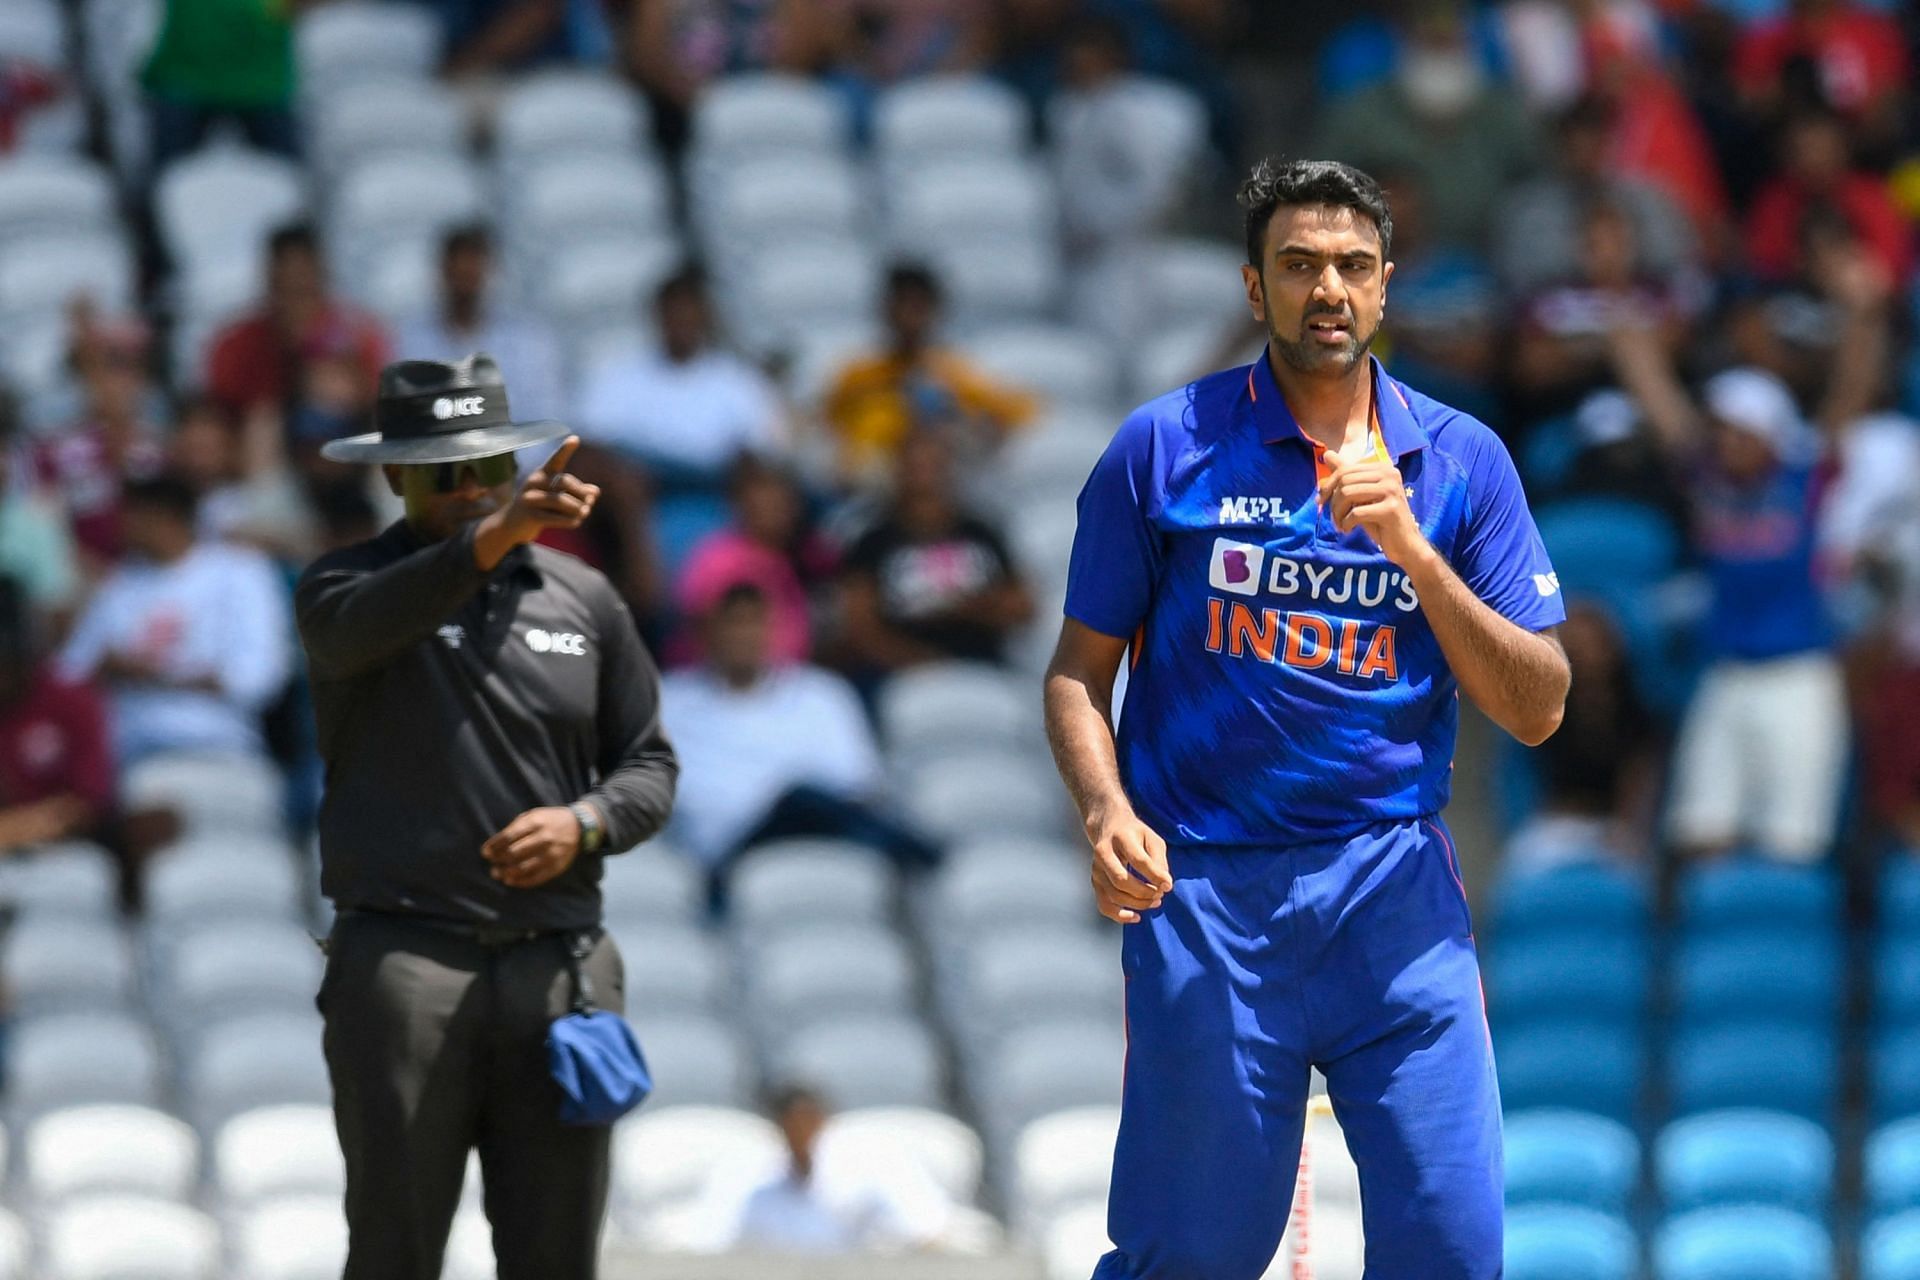 Asia Cup India Squad: Ex-player Karsan Ghavri bats for Ravichandran Ashwin Asia Cup 2022 inclusion, says if he delivers, pick him for T20 World Cup